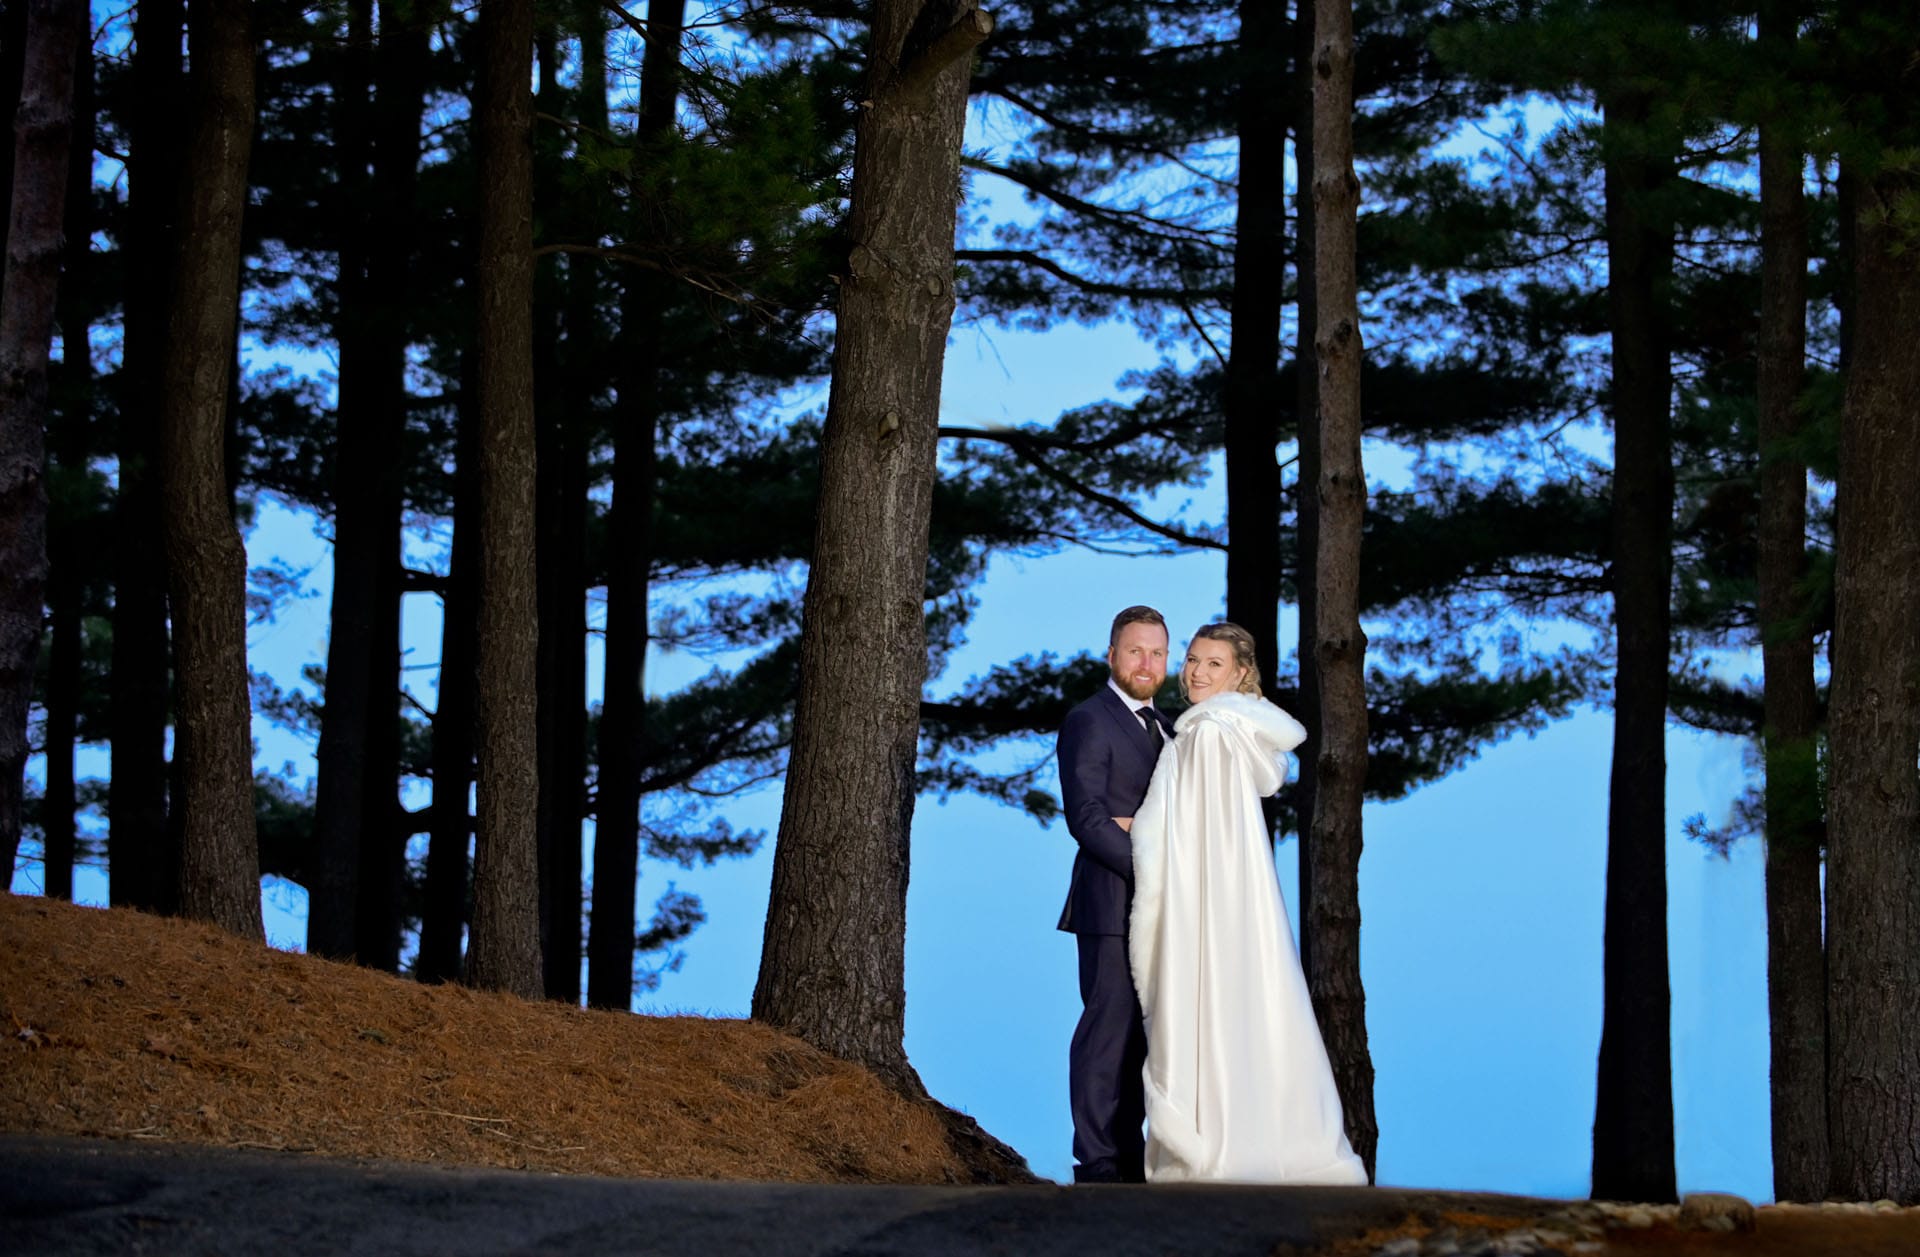 Bride and groom pose in woods at Oakhurst Golf Course in Clarkston, Michigan in winter at dusk.